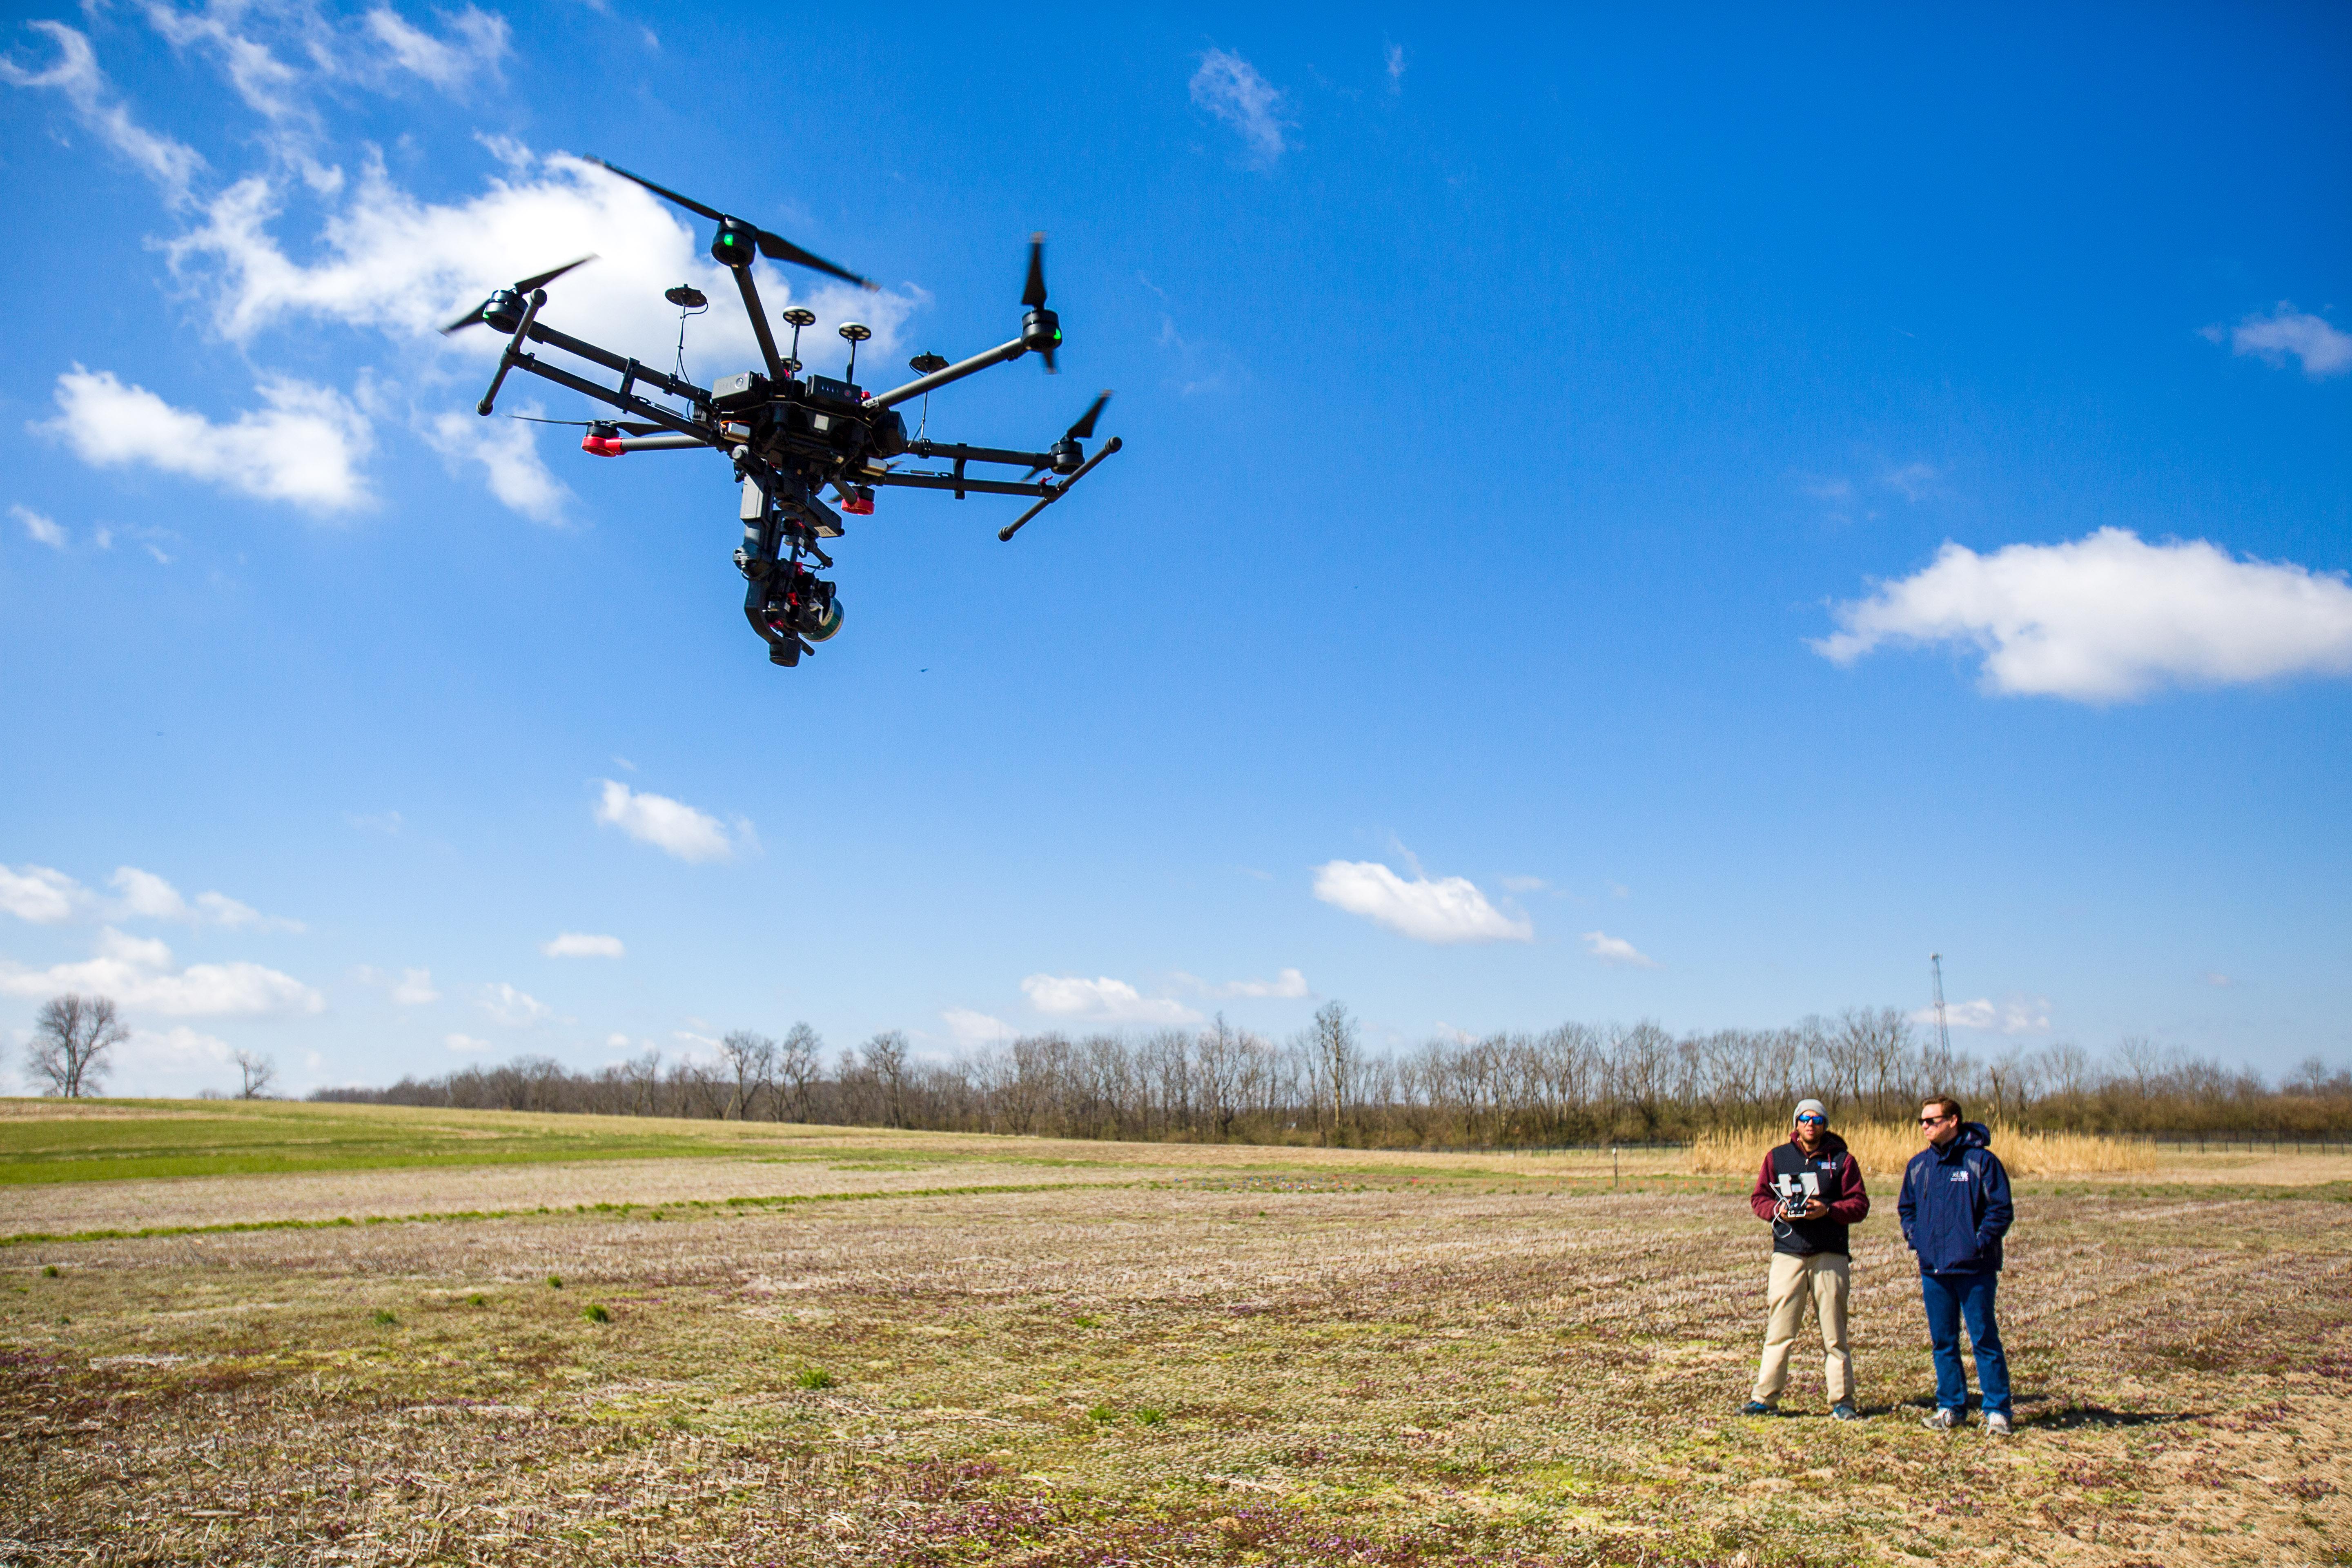 Joshua Jackson, UK assistant professor, and Shawn O'Neal, UK graduate student fly a drone at one of UK's farms. Photo by Matt Barton, UK agricultural communications.